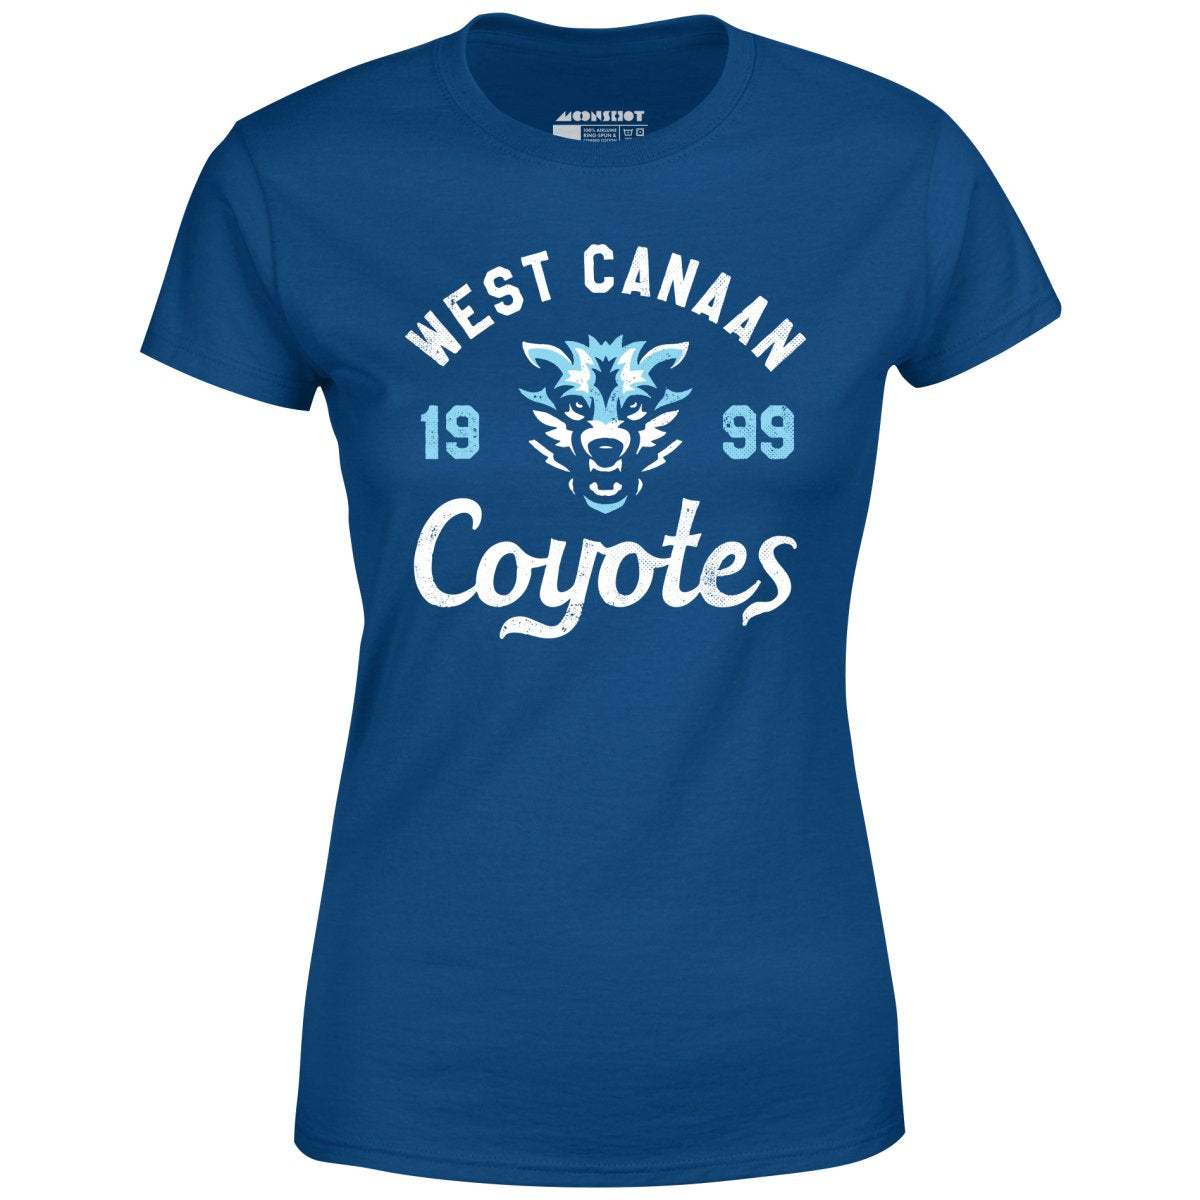 West Canaan Coyotes - Women's T-Shirt